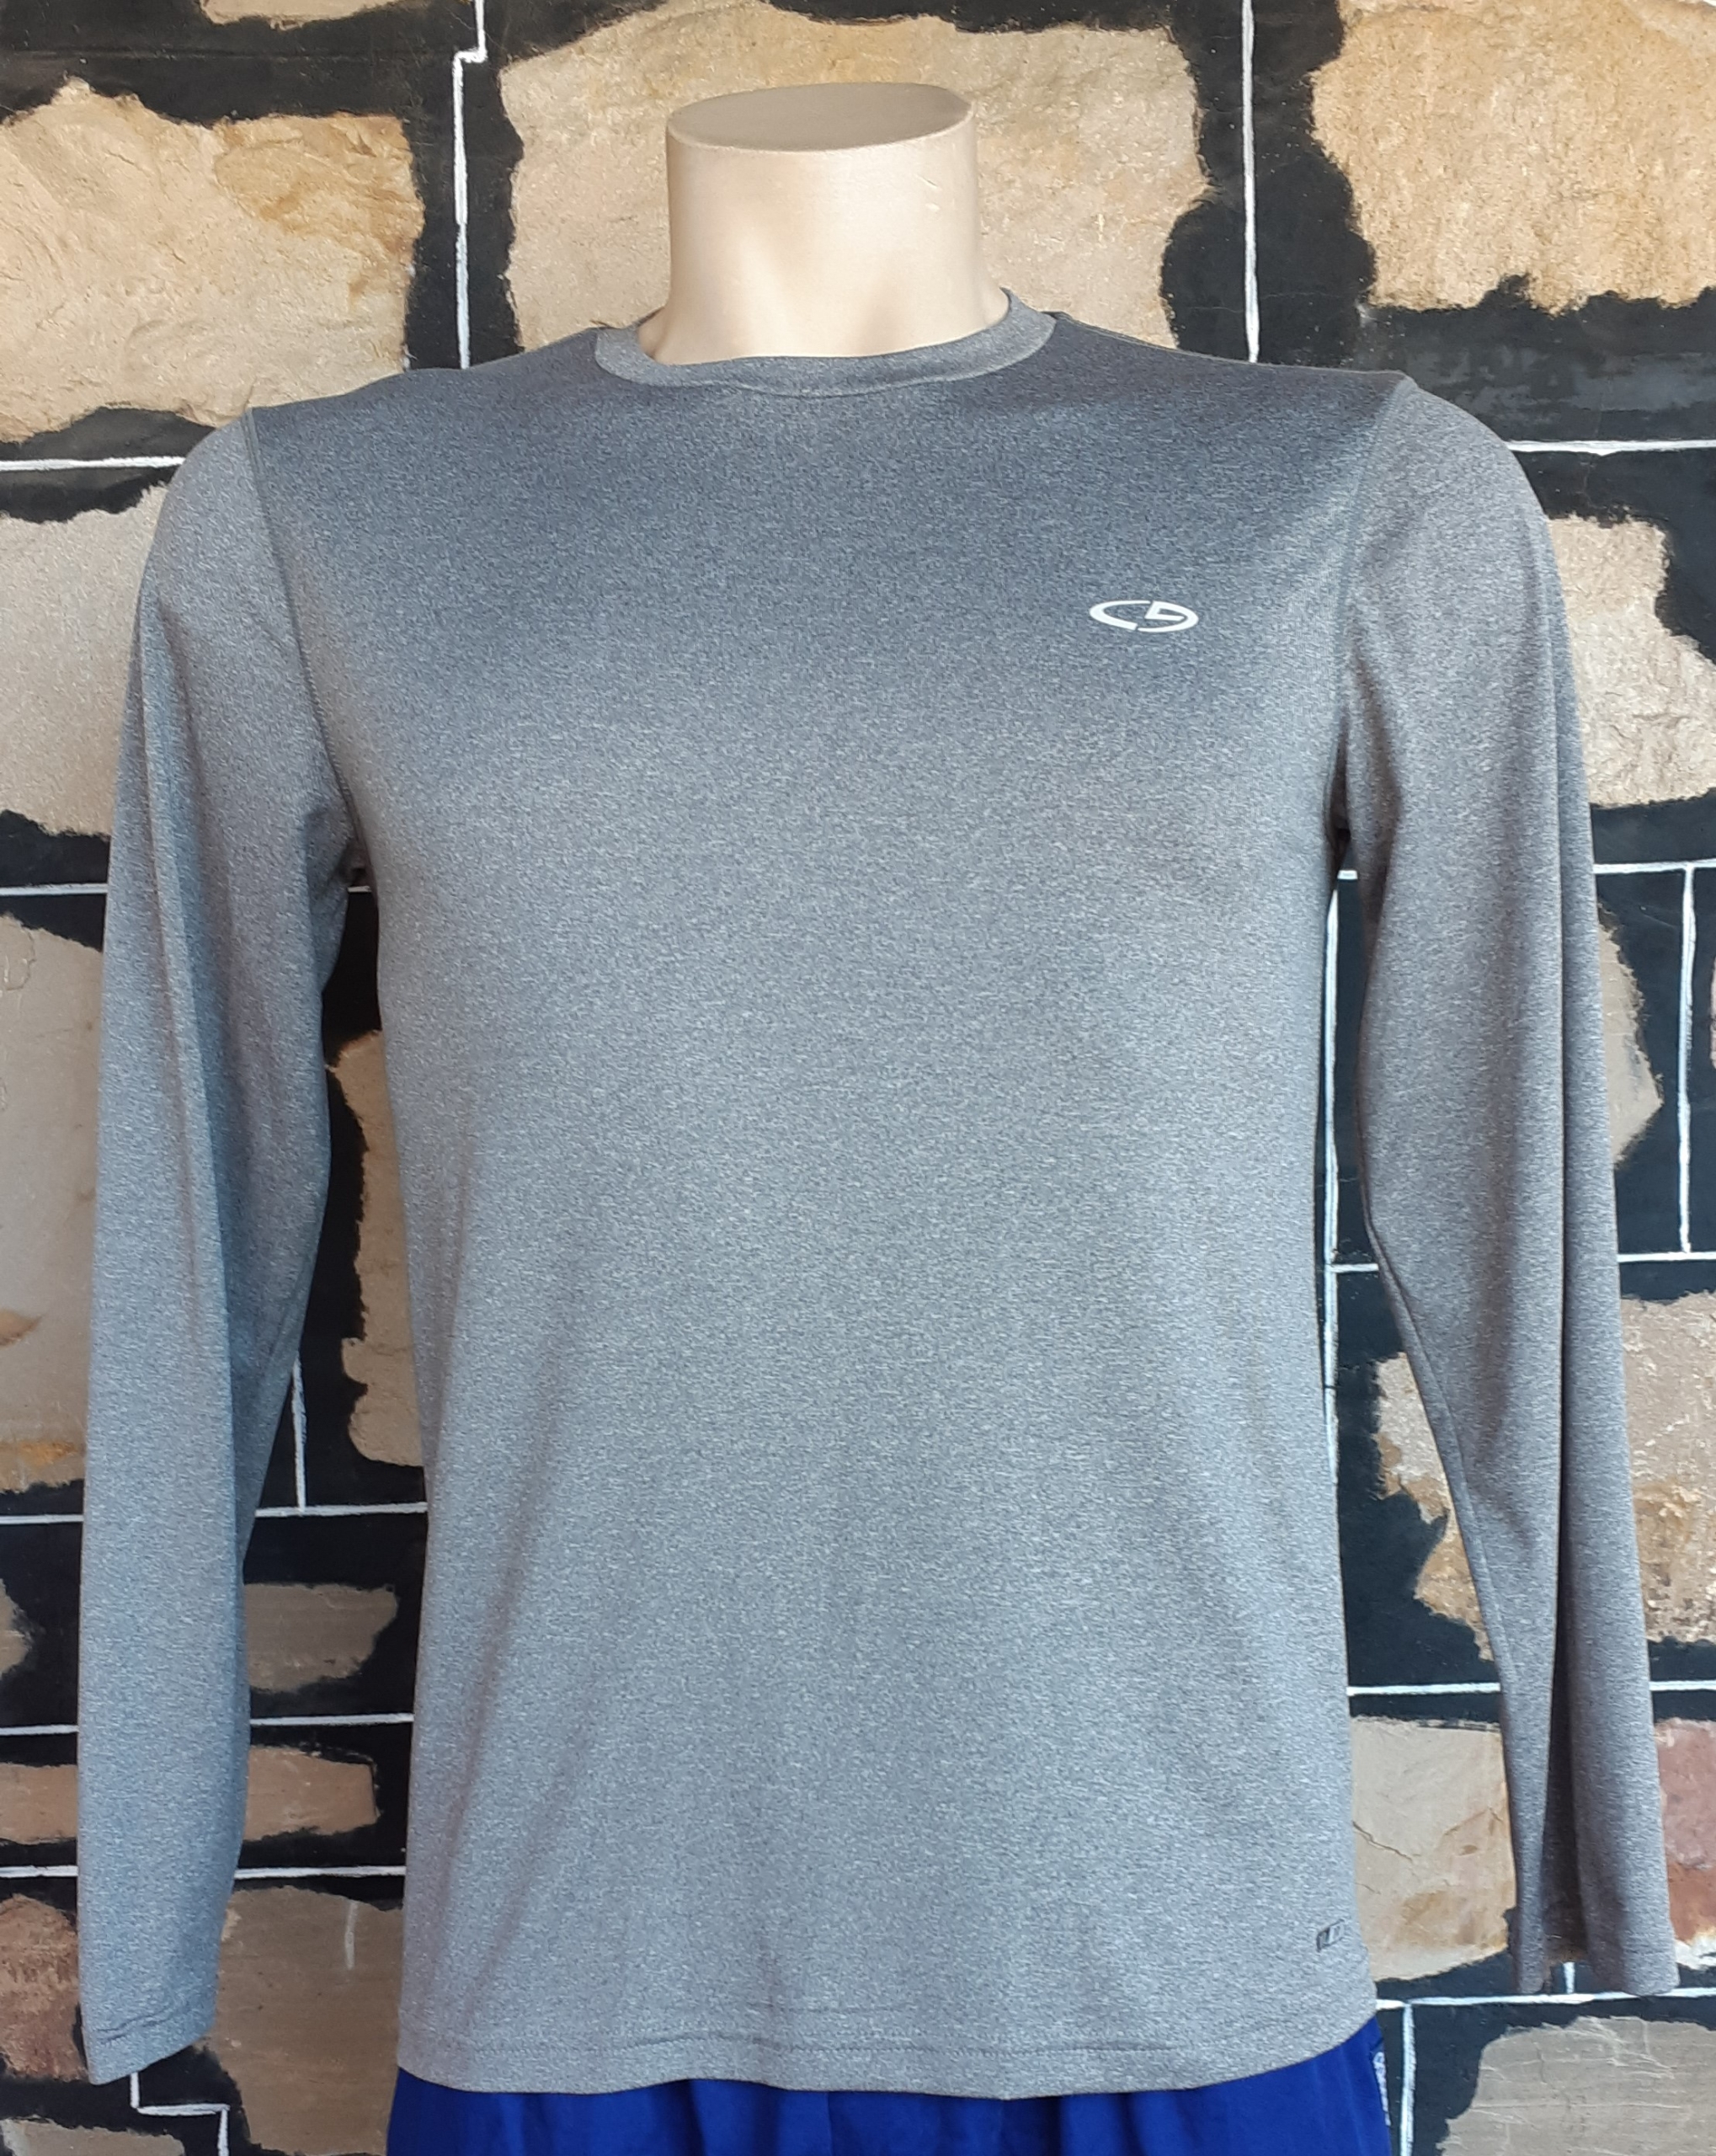 Long Sleeved Tee, grey, polyester, size M